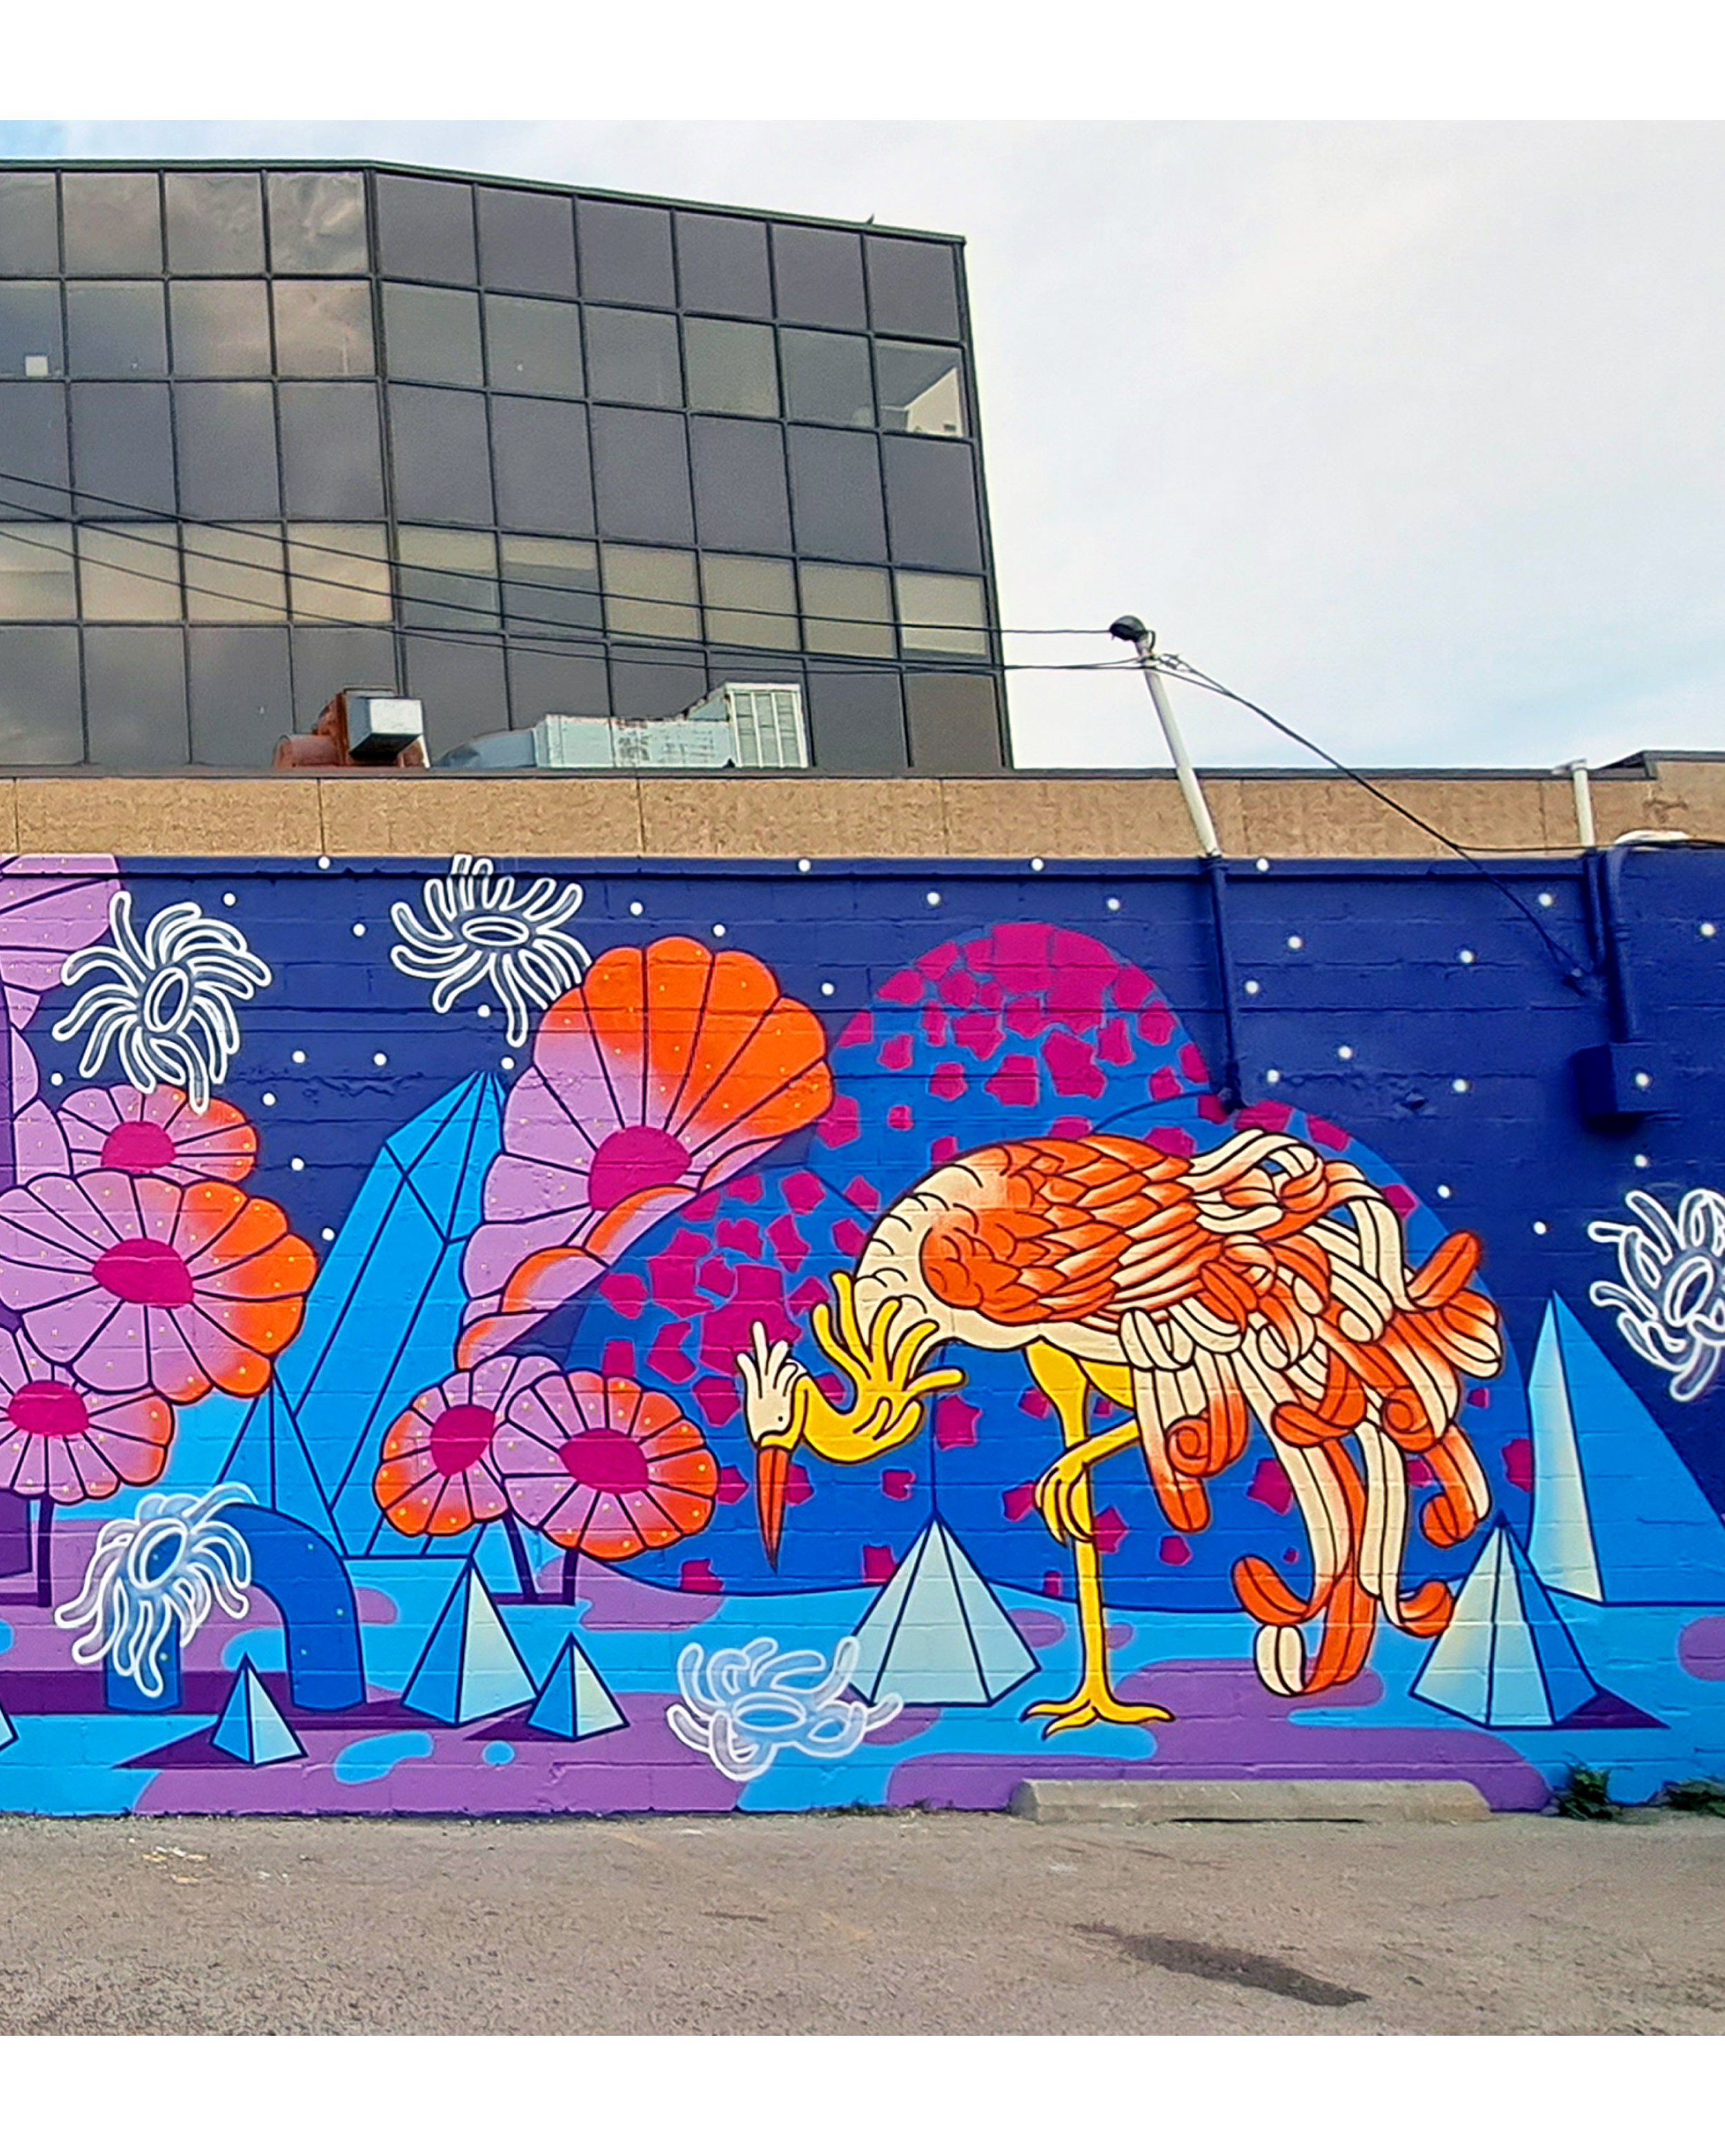  "Nocturne of other lands" painted for BUMP Mural Festival  24’x60’ Exterior Acrylic Paint, Spray paint  Calgary, AB, Canada - 2023  Client: Walls Alive 